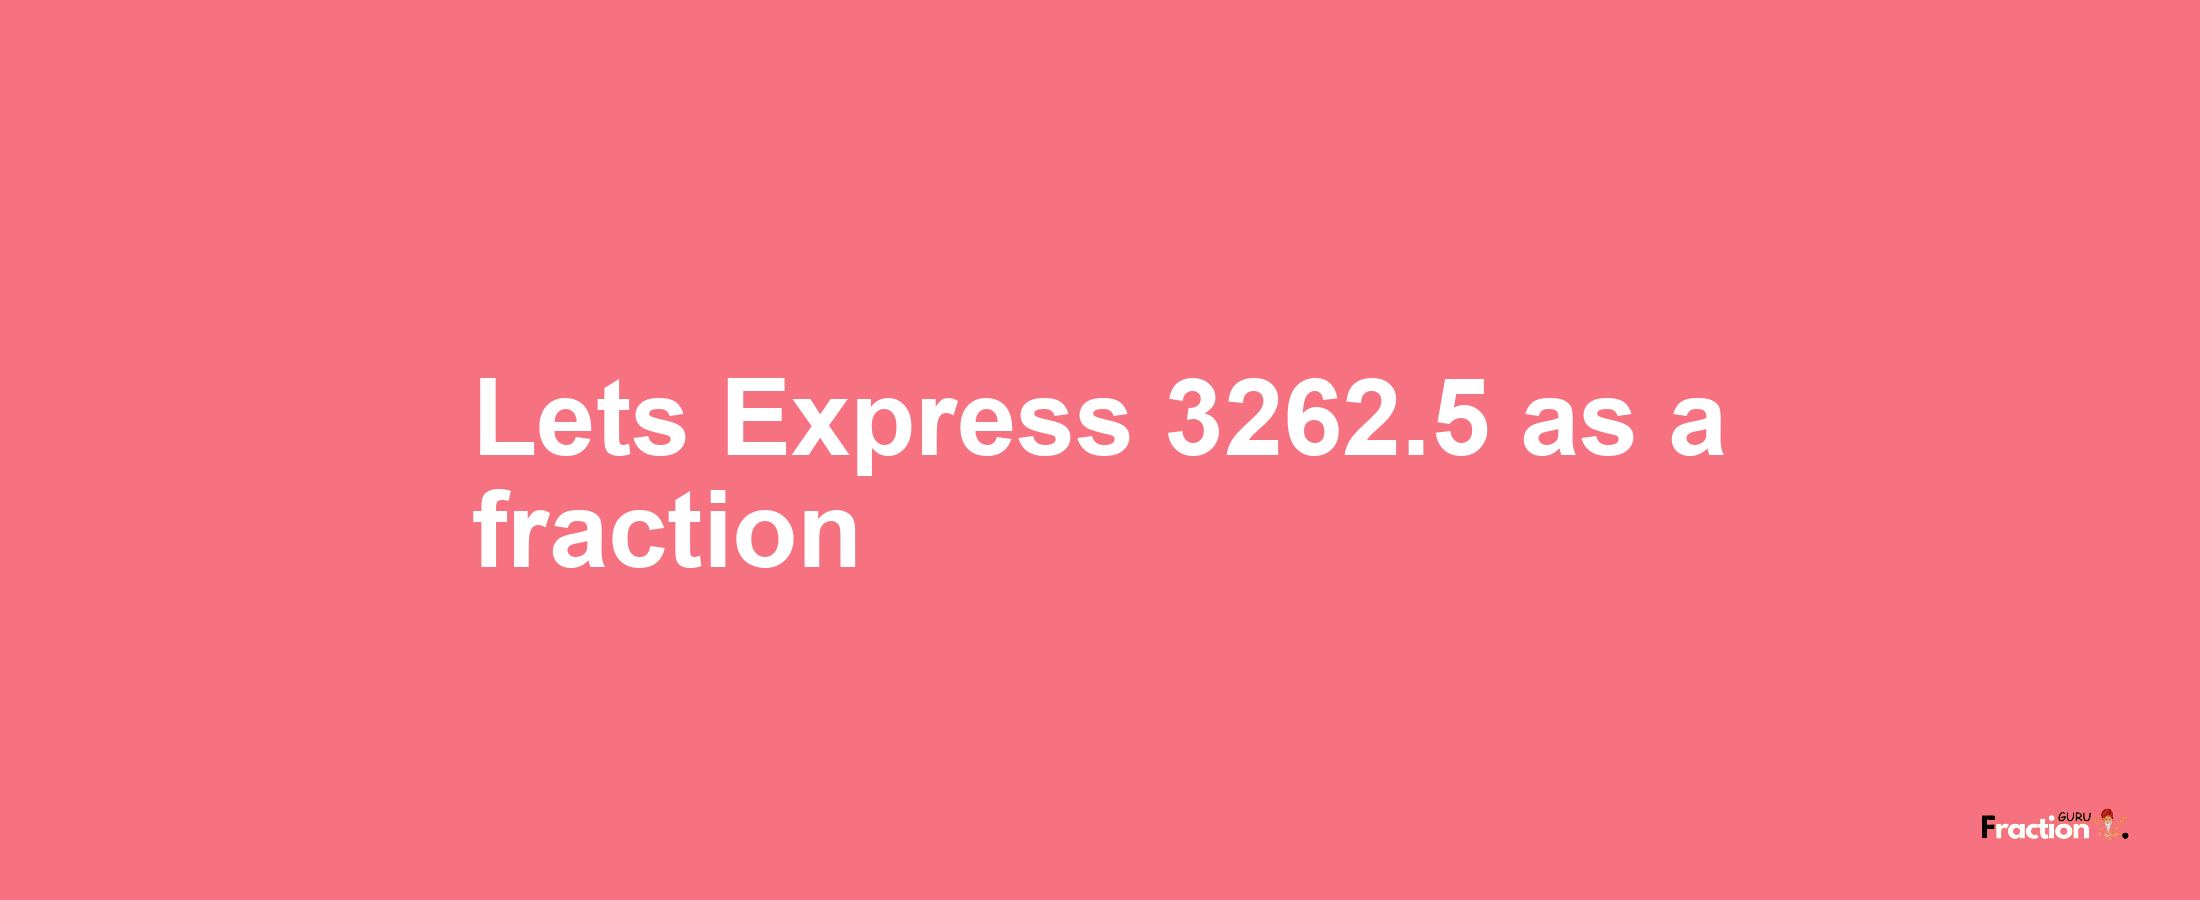 Lets Express 3262.5 as afraction